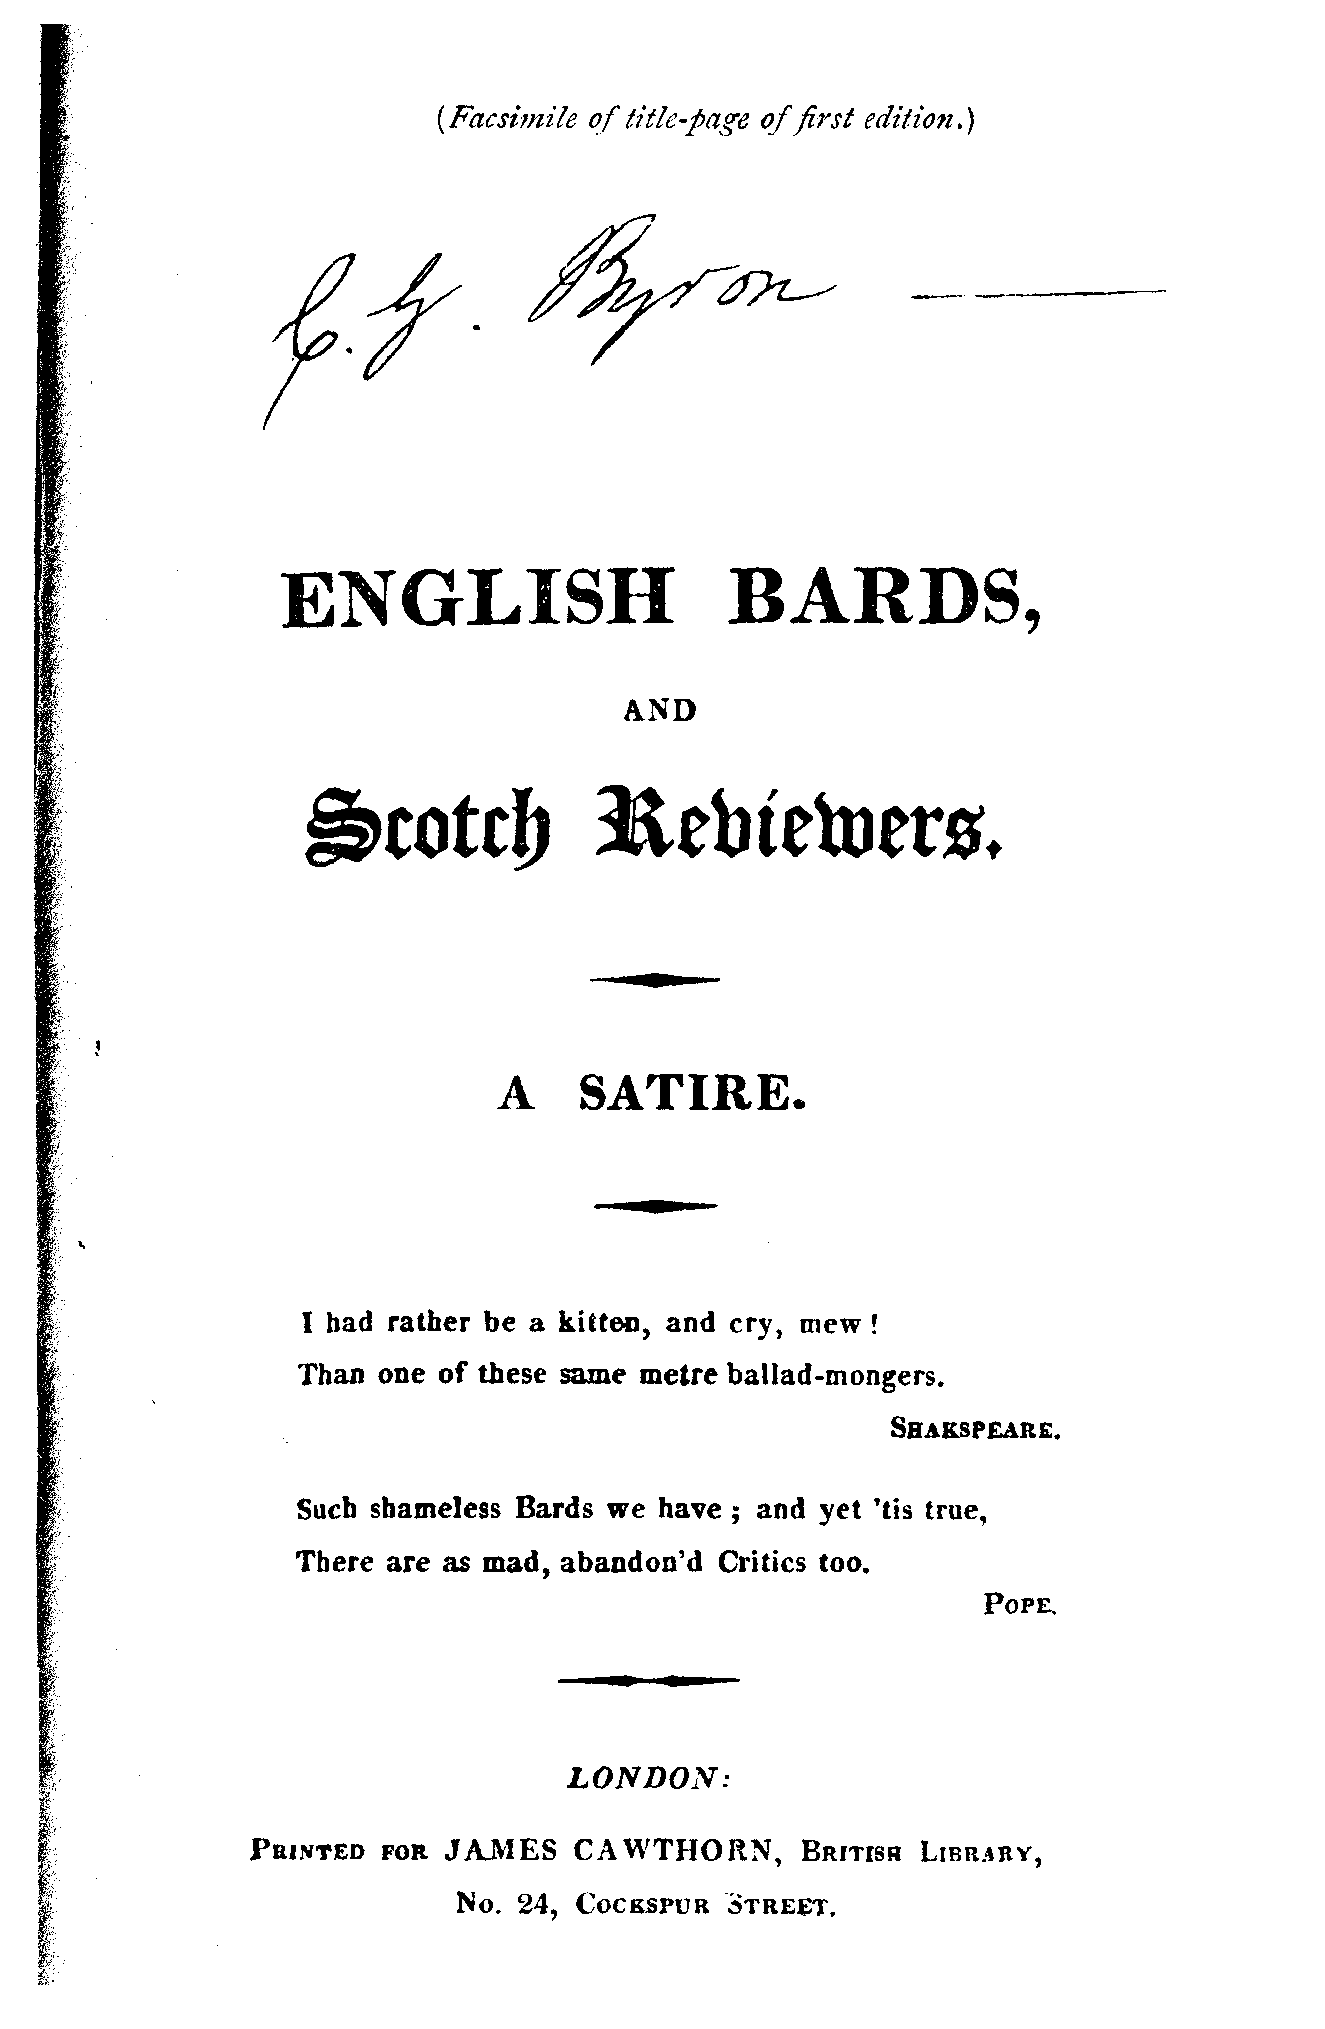 facsimile of title page of 'English Bards', including Byron's signature